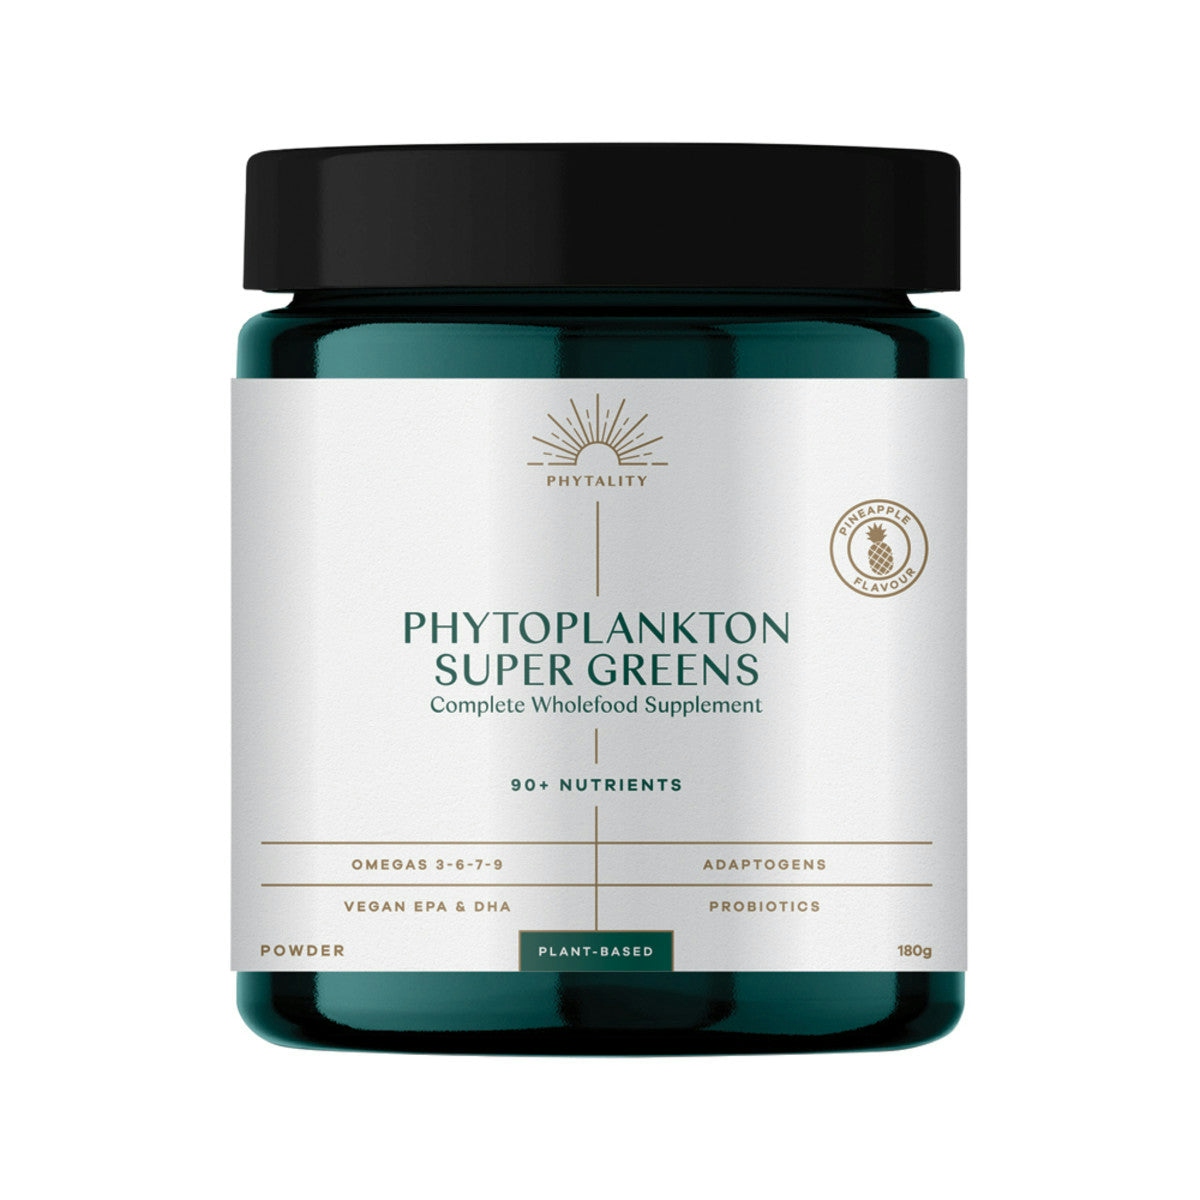 image of Phytality Phytoplankton Super Greens (Complete Wholefood Supplement) Powder 180g on white background